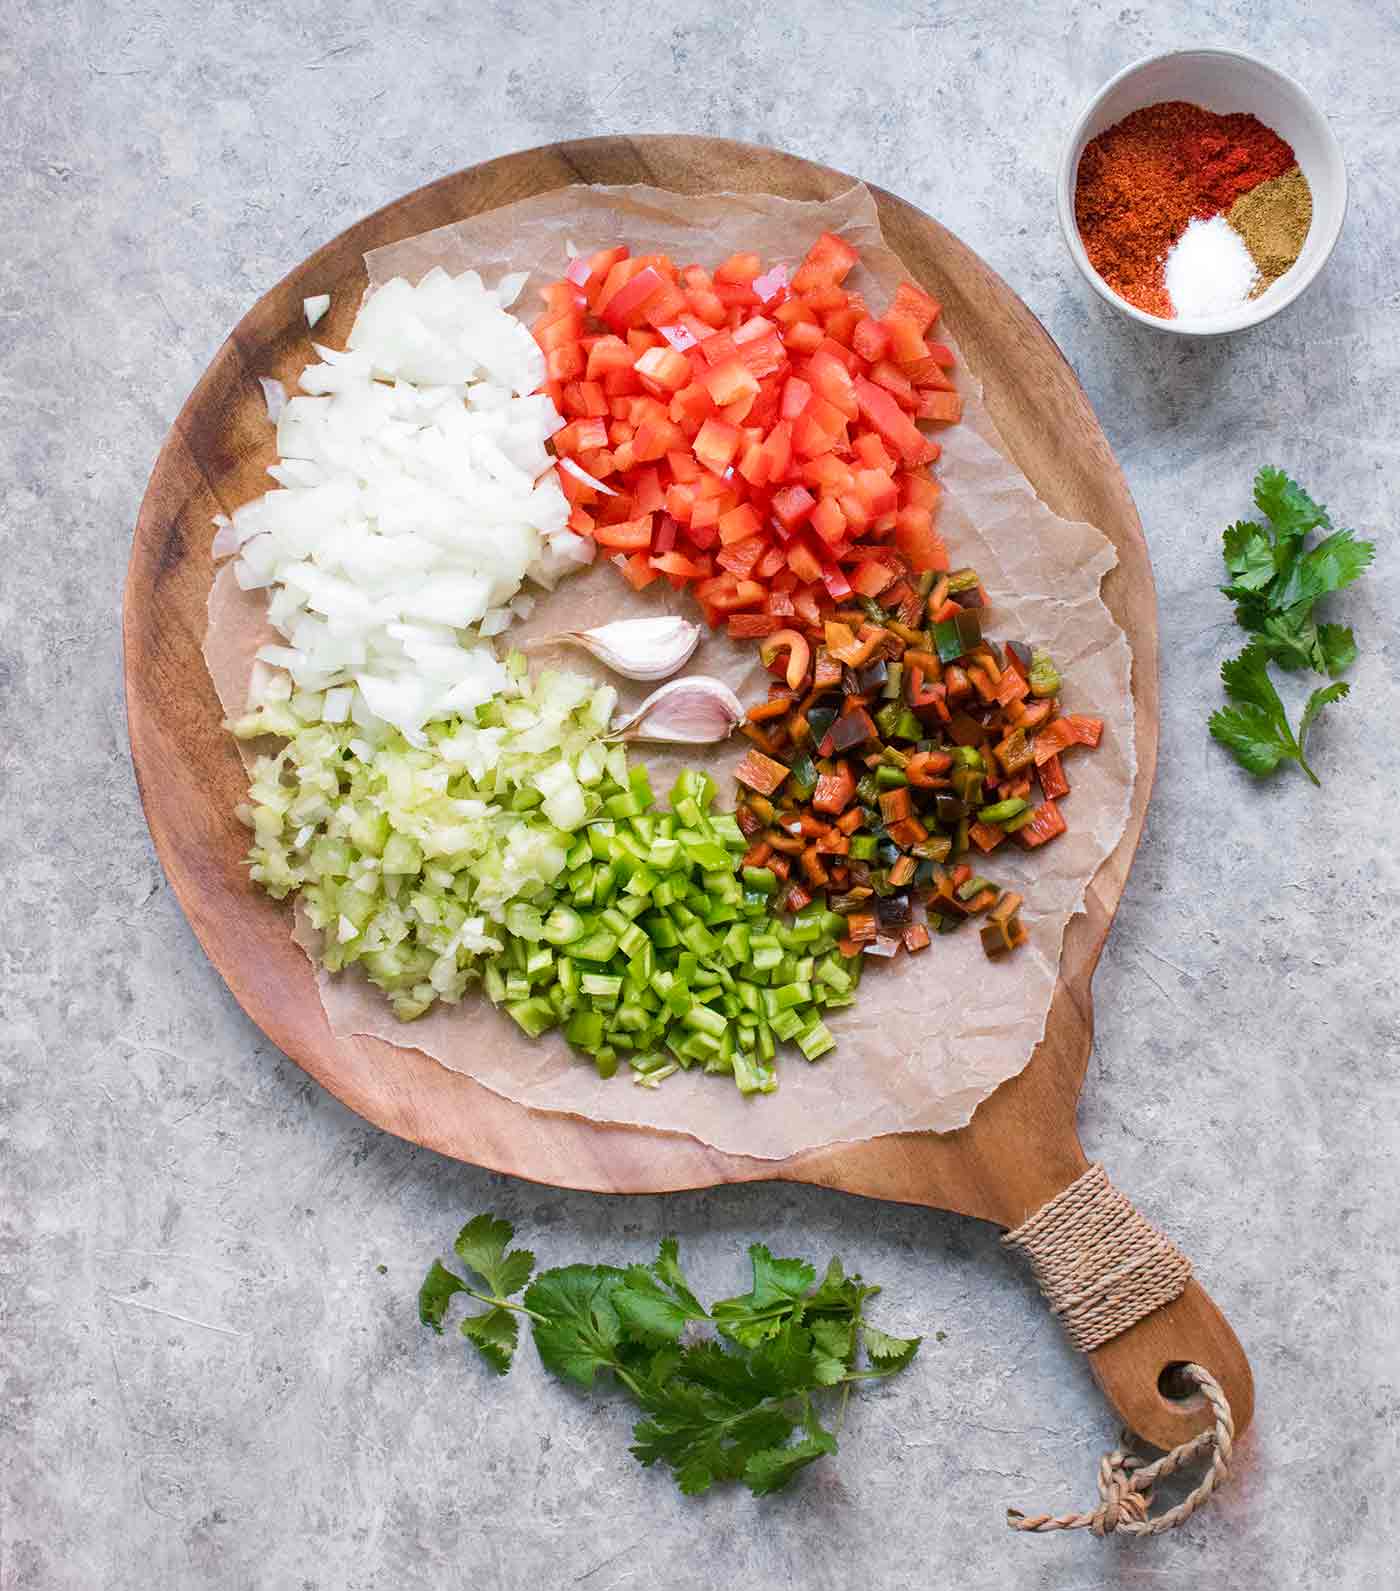 Ingredients for Instant Pot Chicken Tortilla Soup